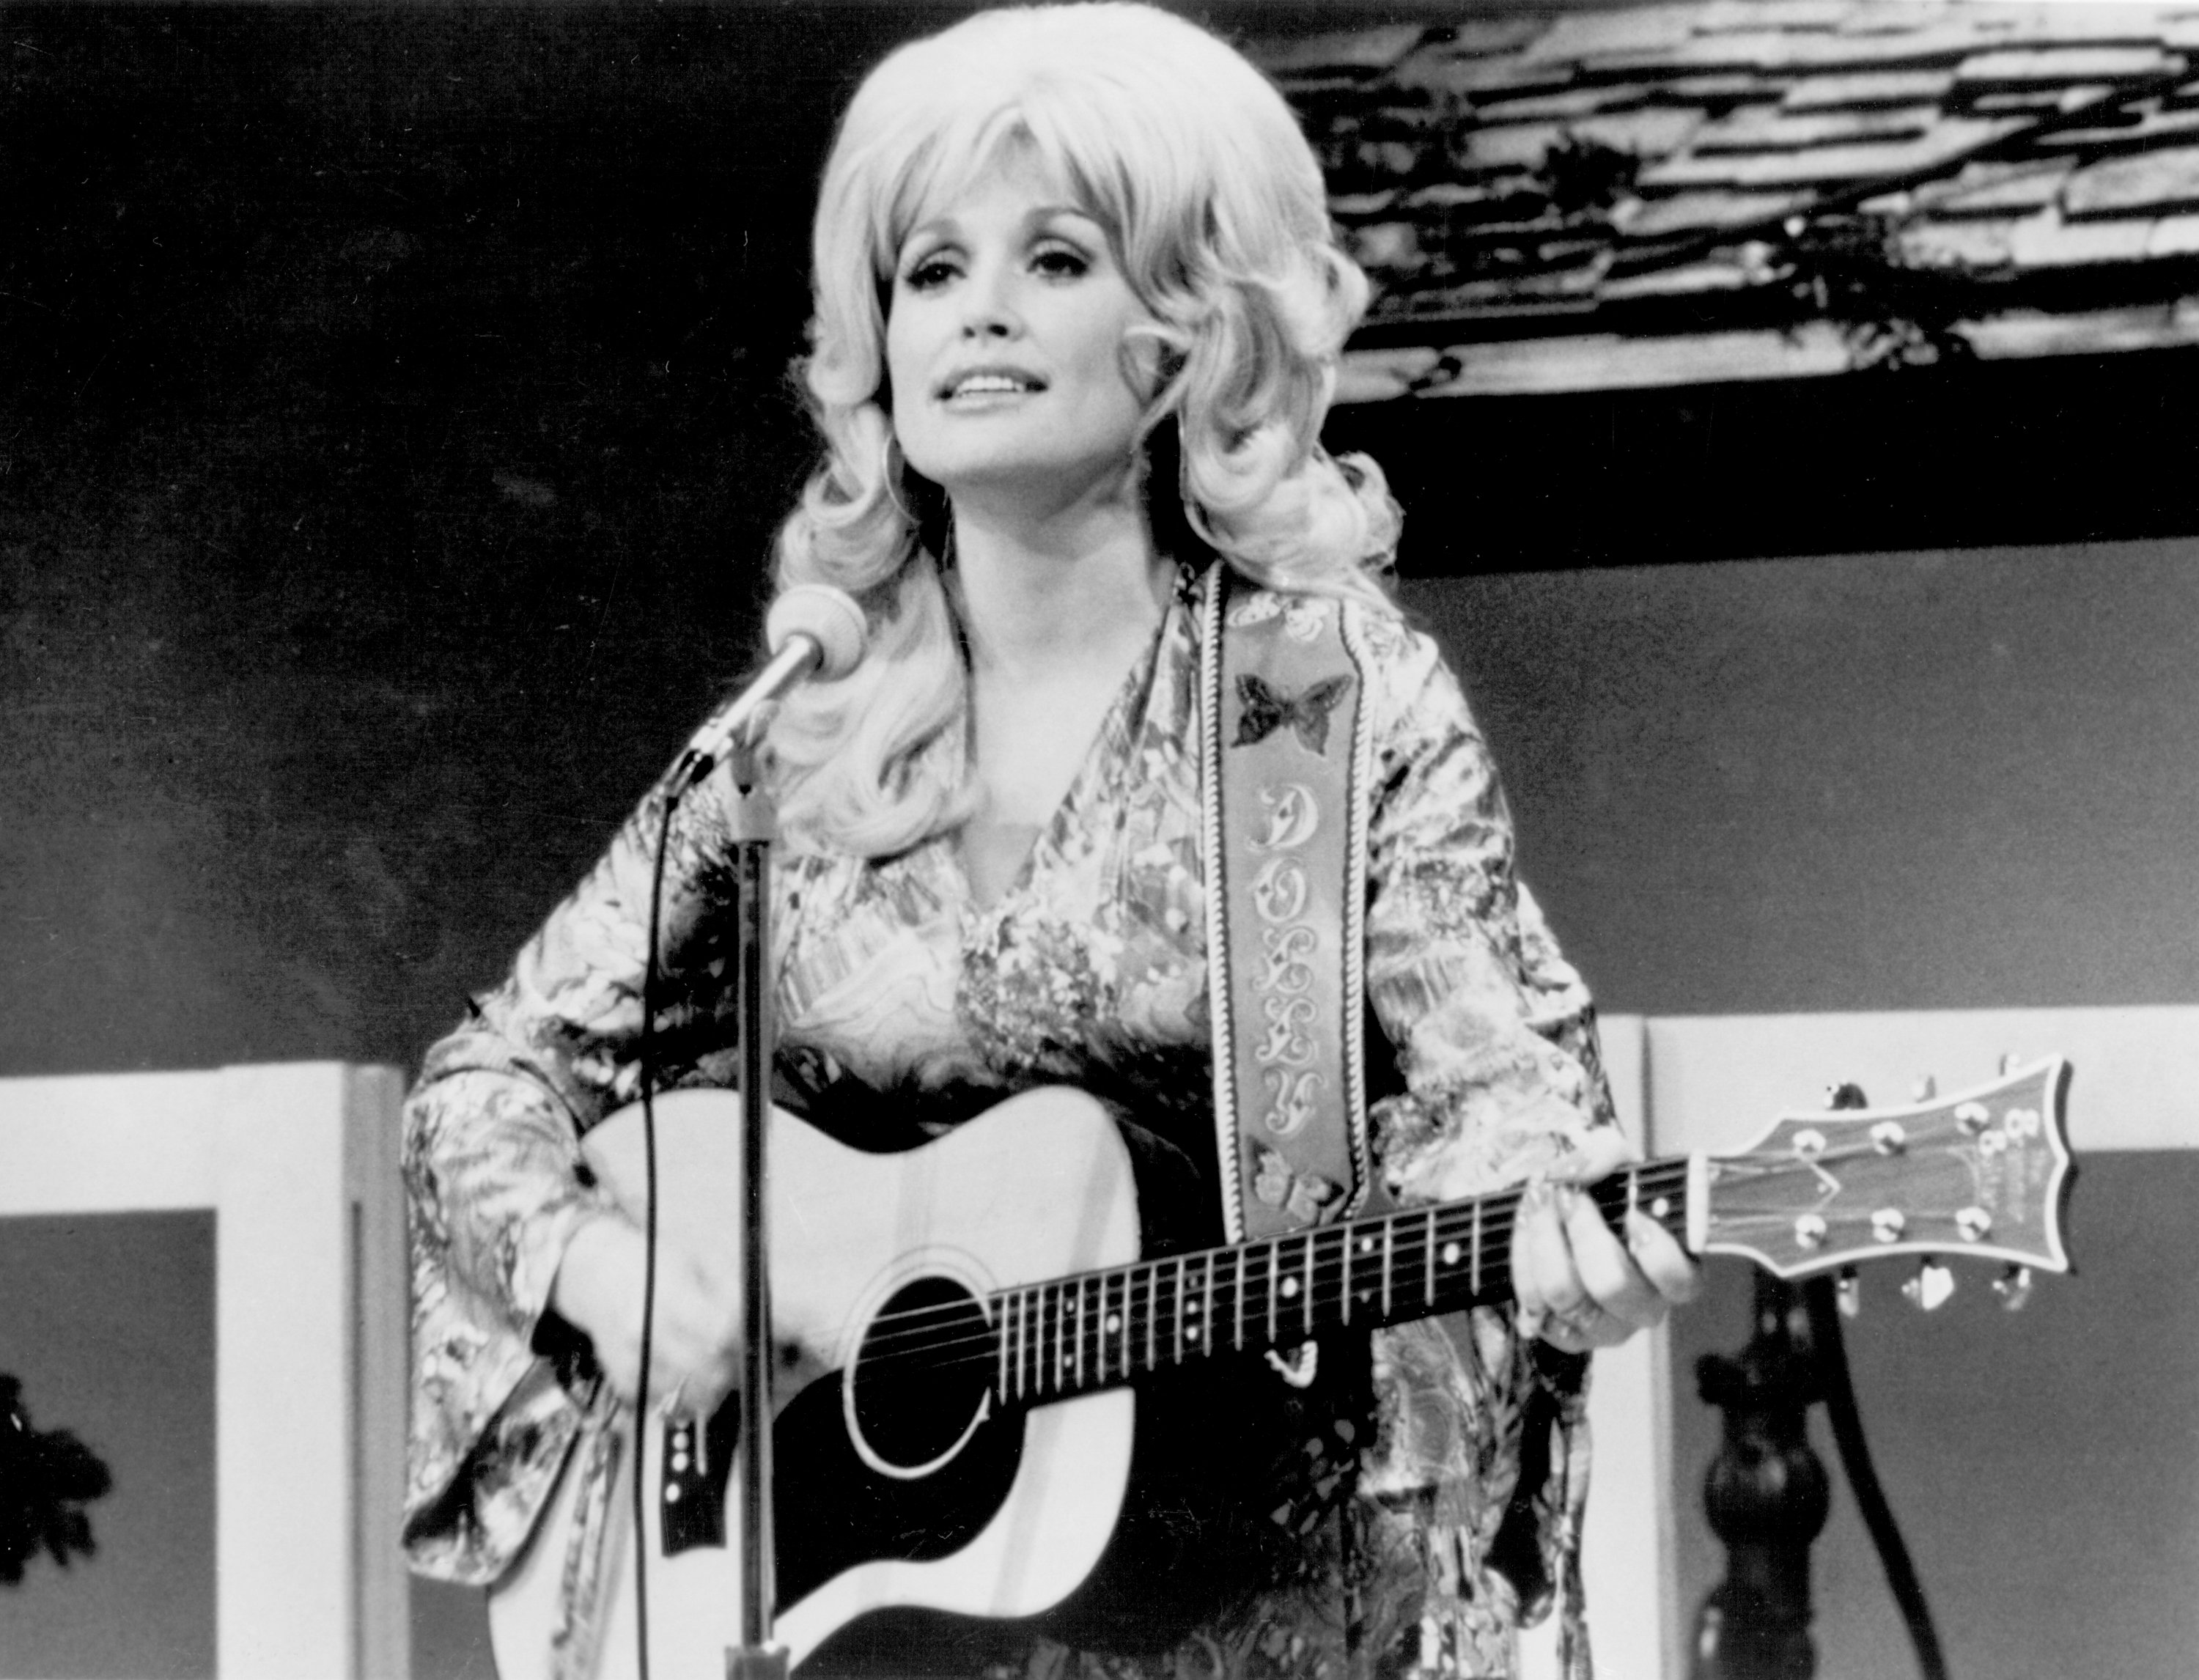 Dolly Parton playing songs on her guitar